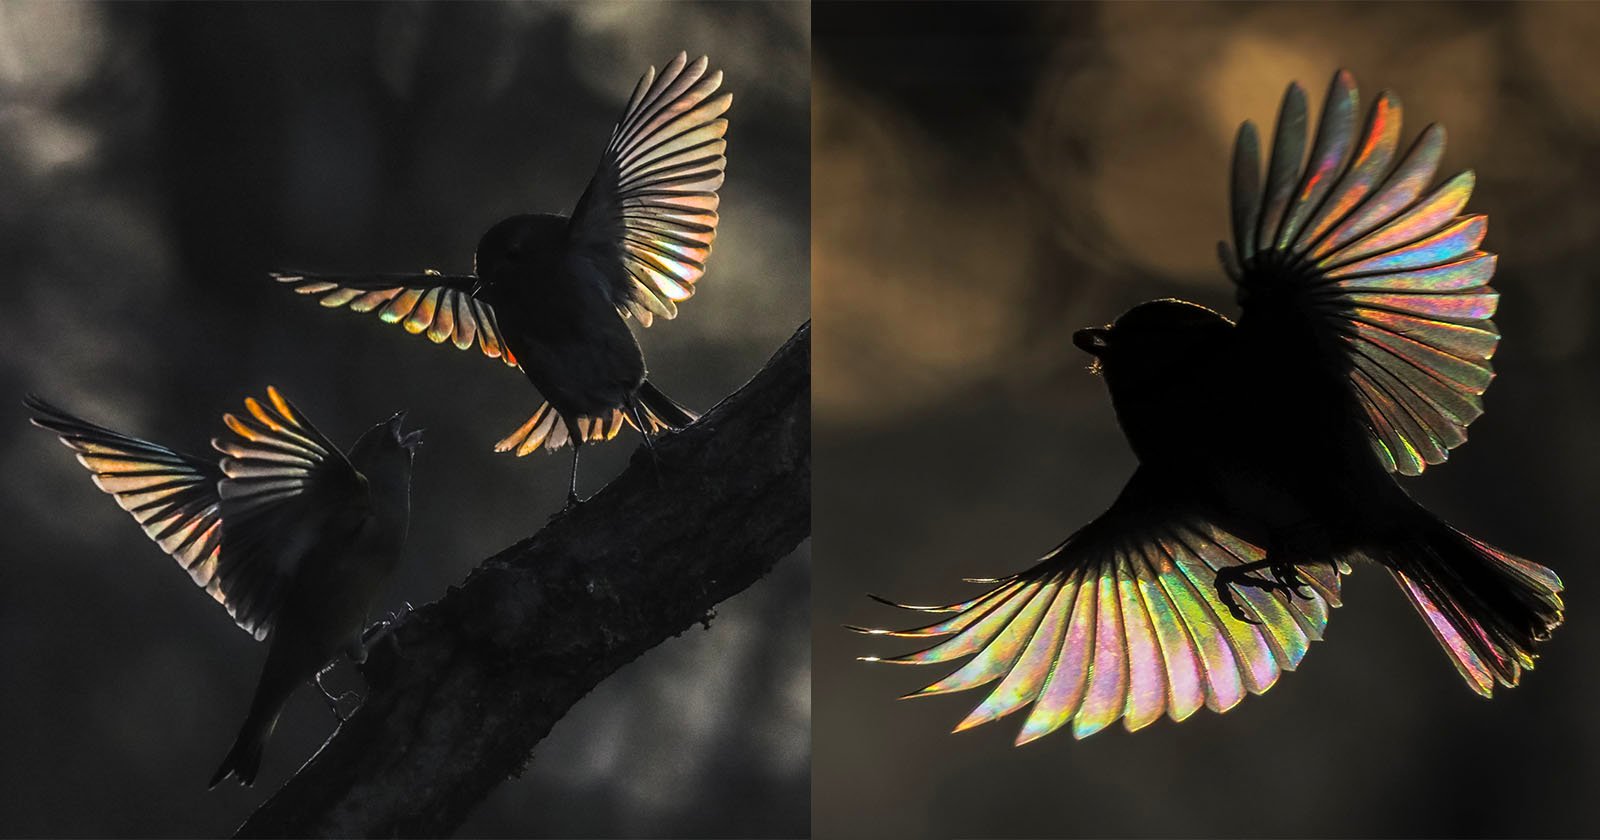 Photographers Beautiful Pictures of Rainbows That Appear in Bird Wings